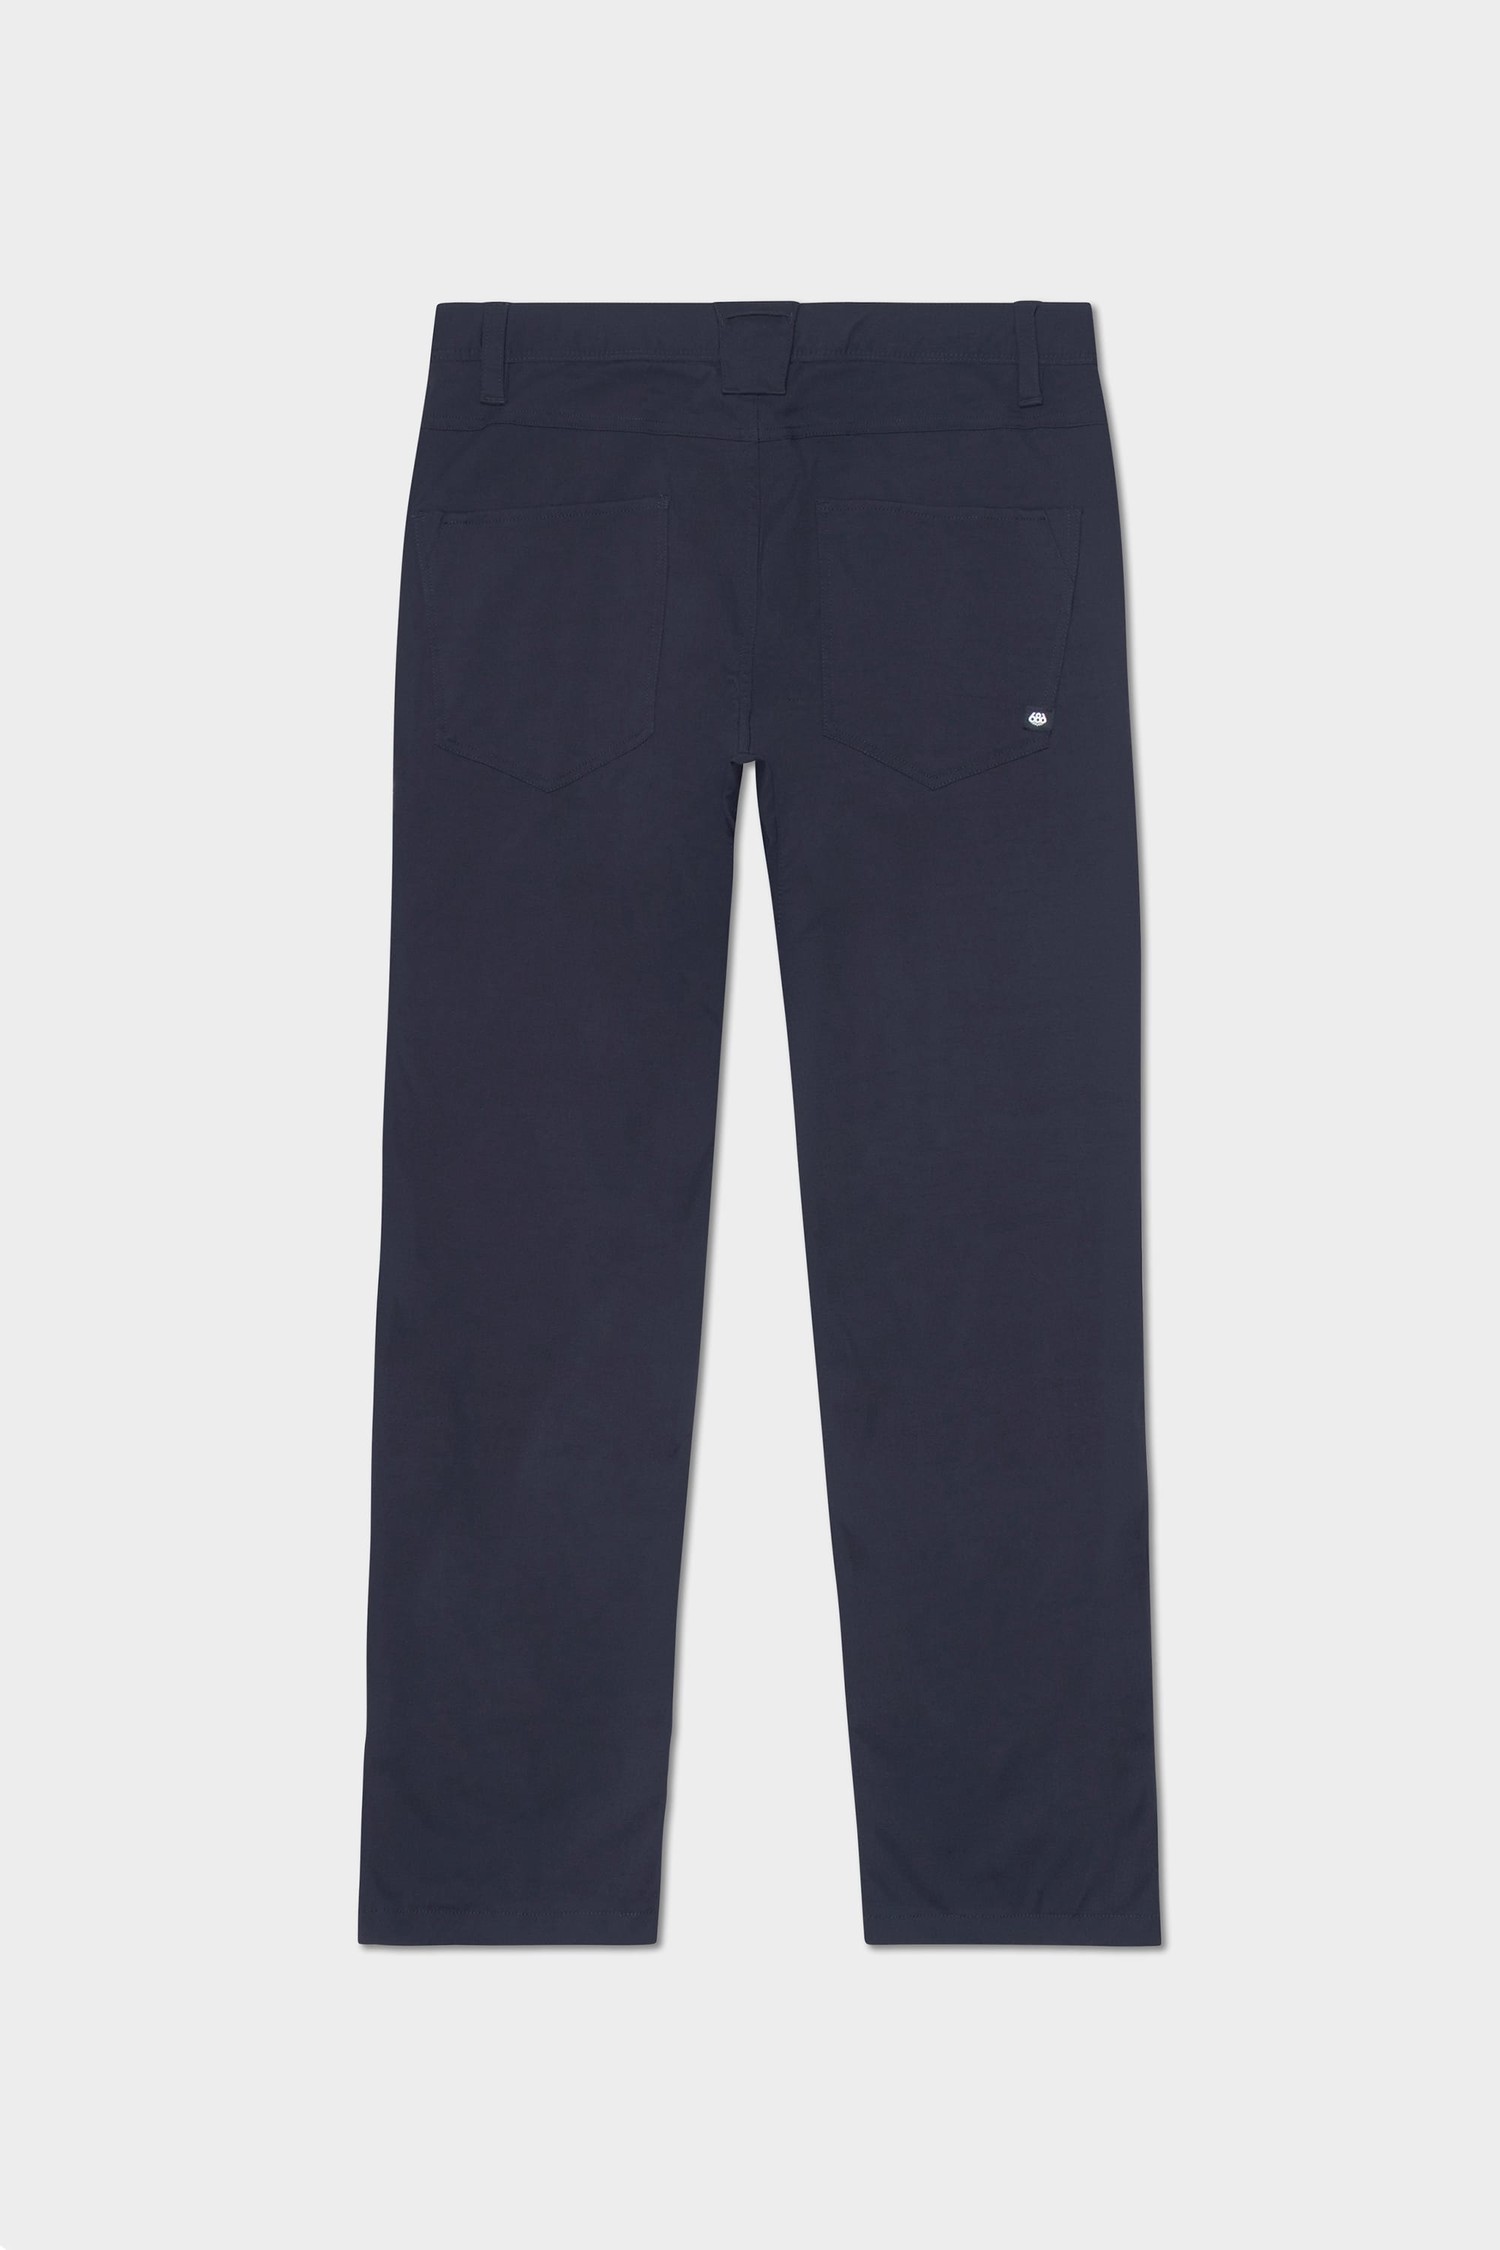 686 Technical Apparel Everywhere Pant - Relaxed Fit | Midnight Navy